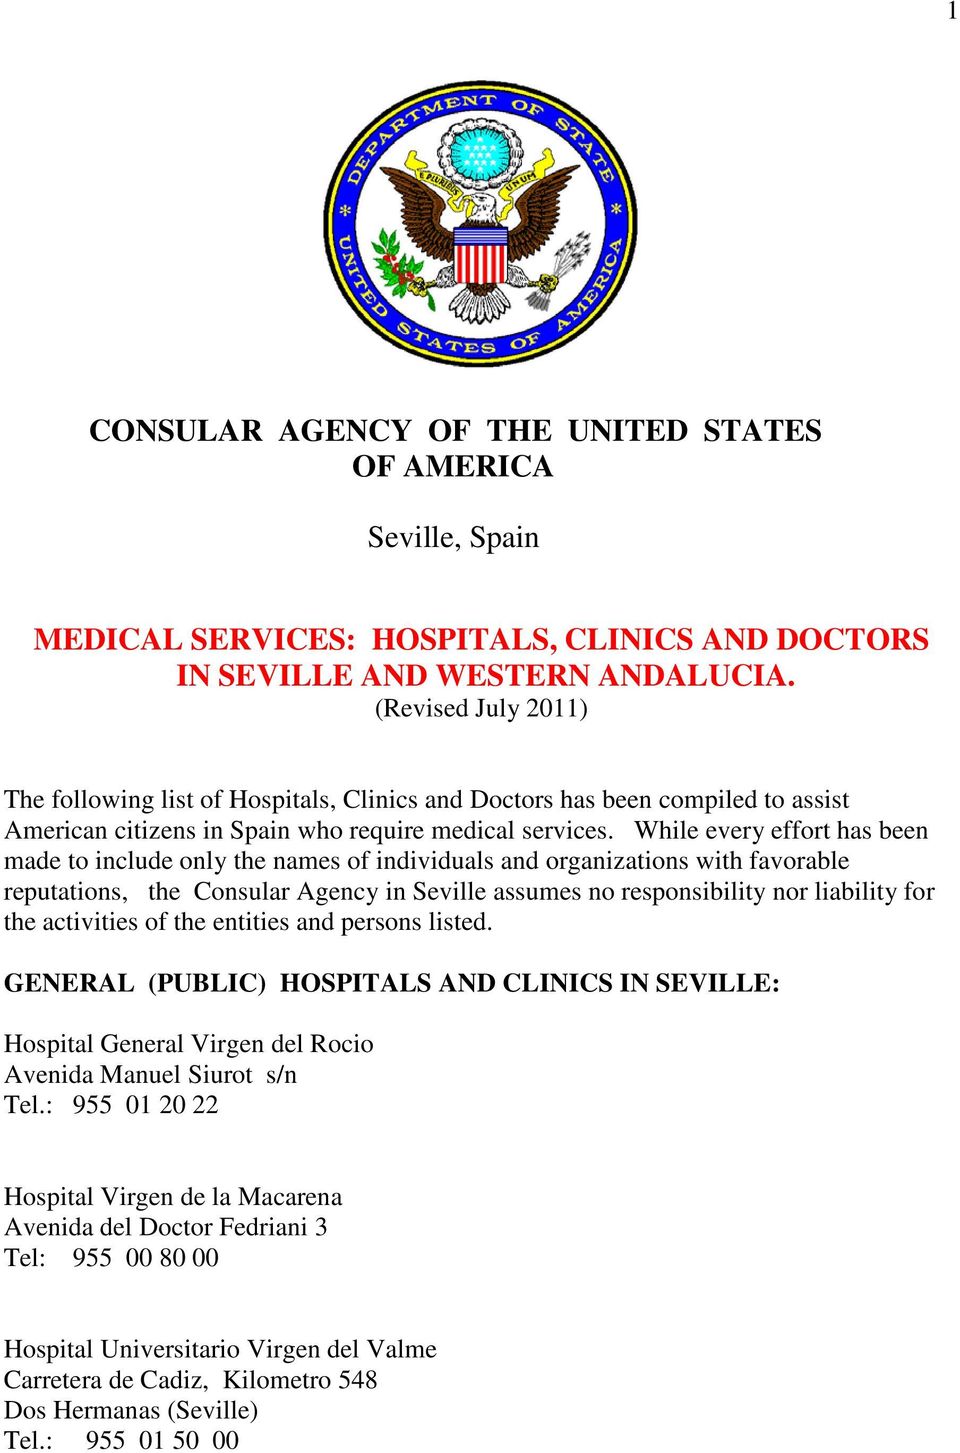 While every effort has been made to include only the names of individuals and organizations with favorable reputations, the Consular Agency in assumes no responsibility nor liability for the